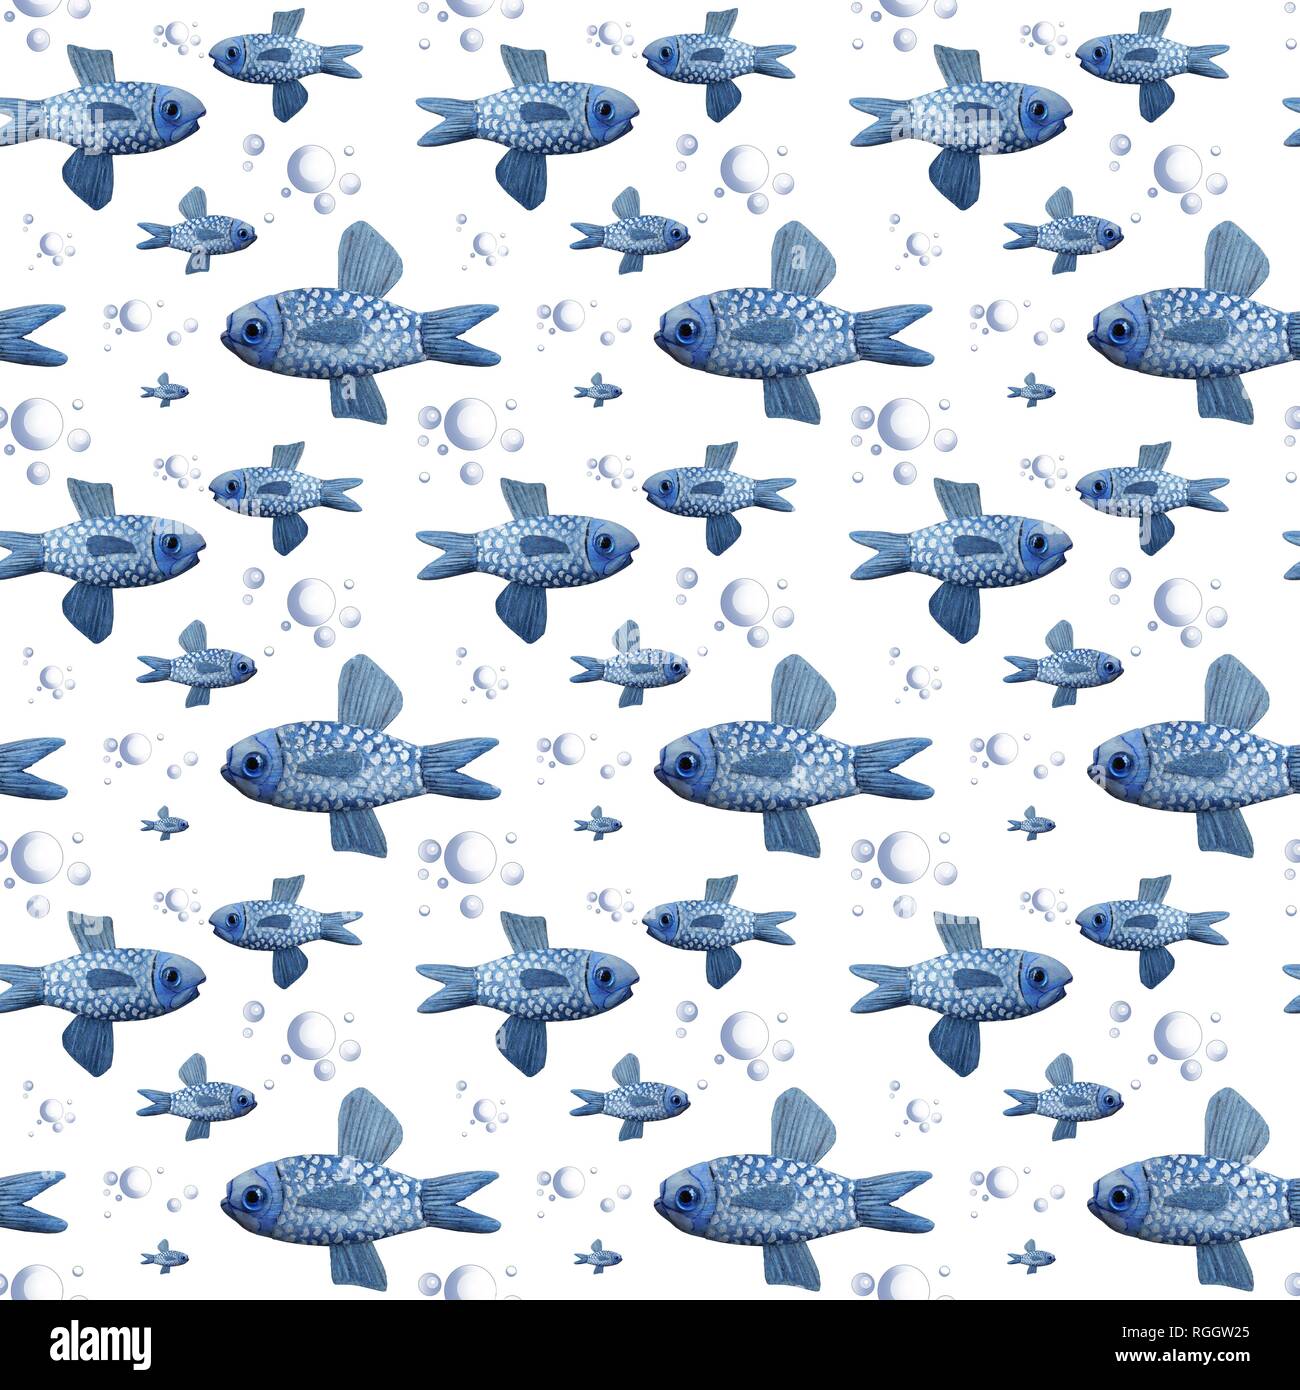 Wallpaper, wrapping paper, seamless pattern, fish with bubbles, background white, Germany Stock Photo